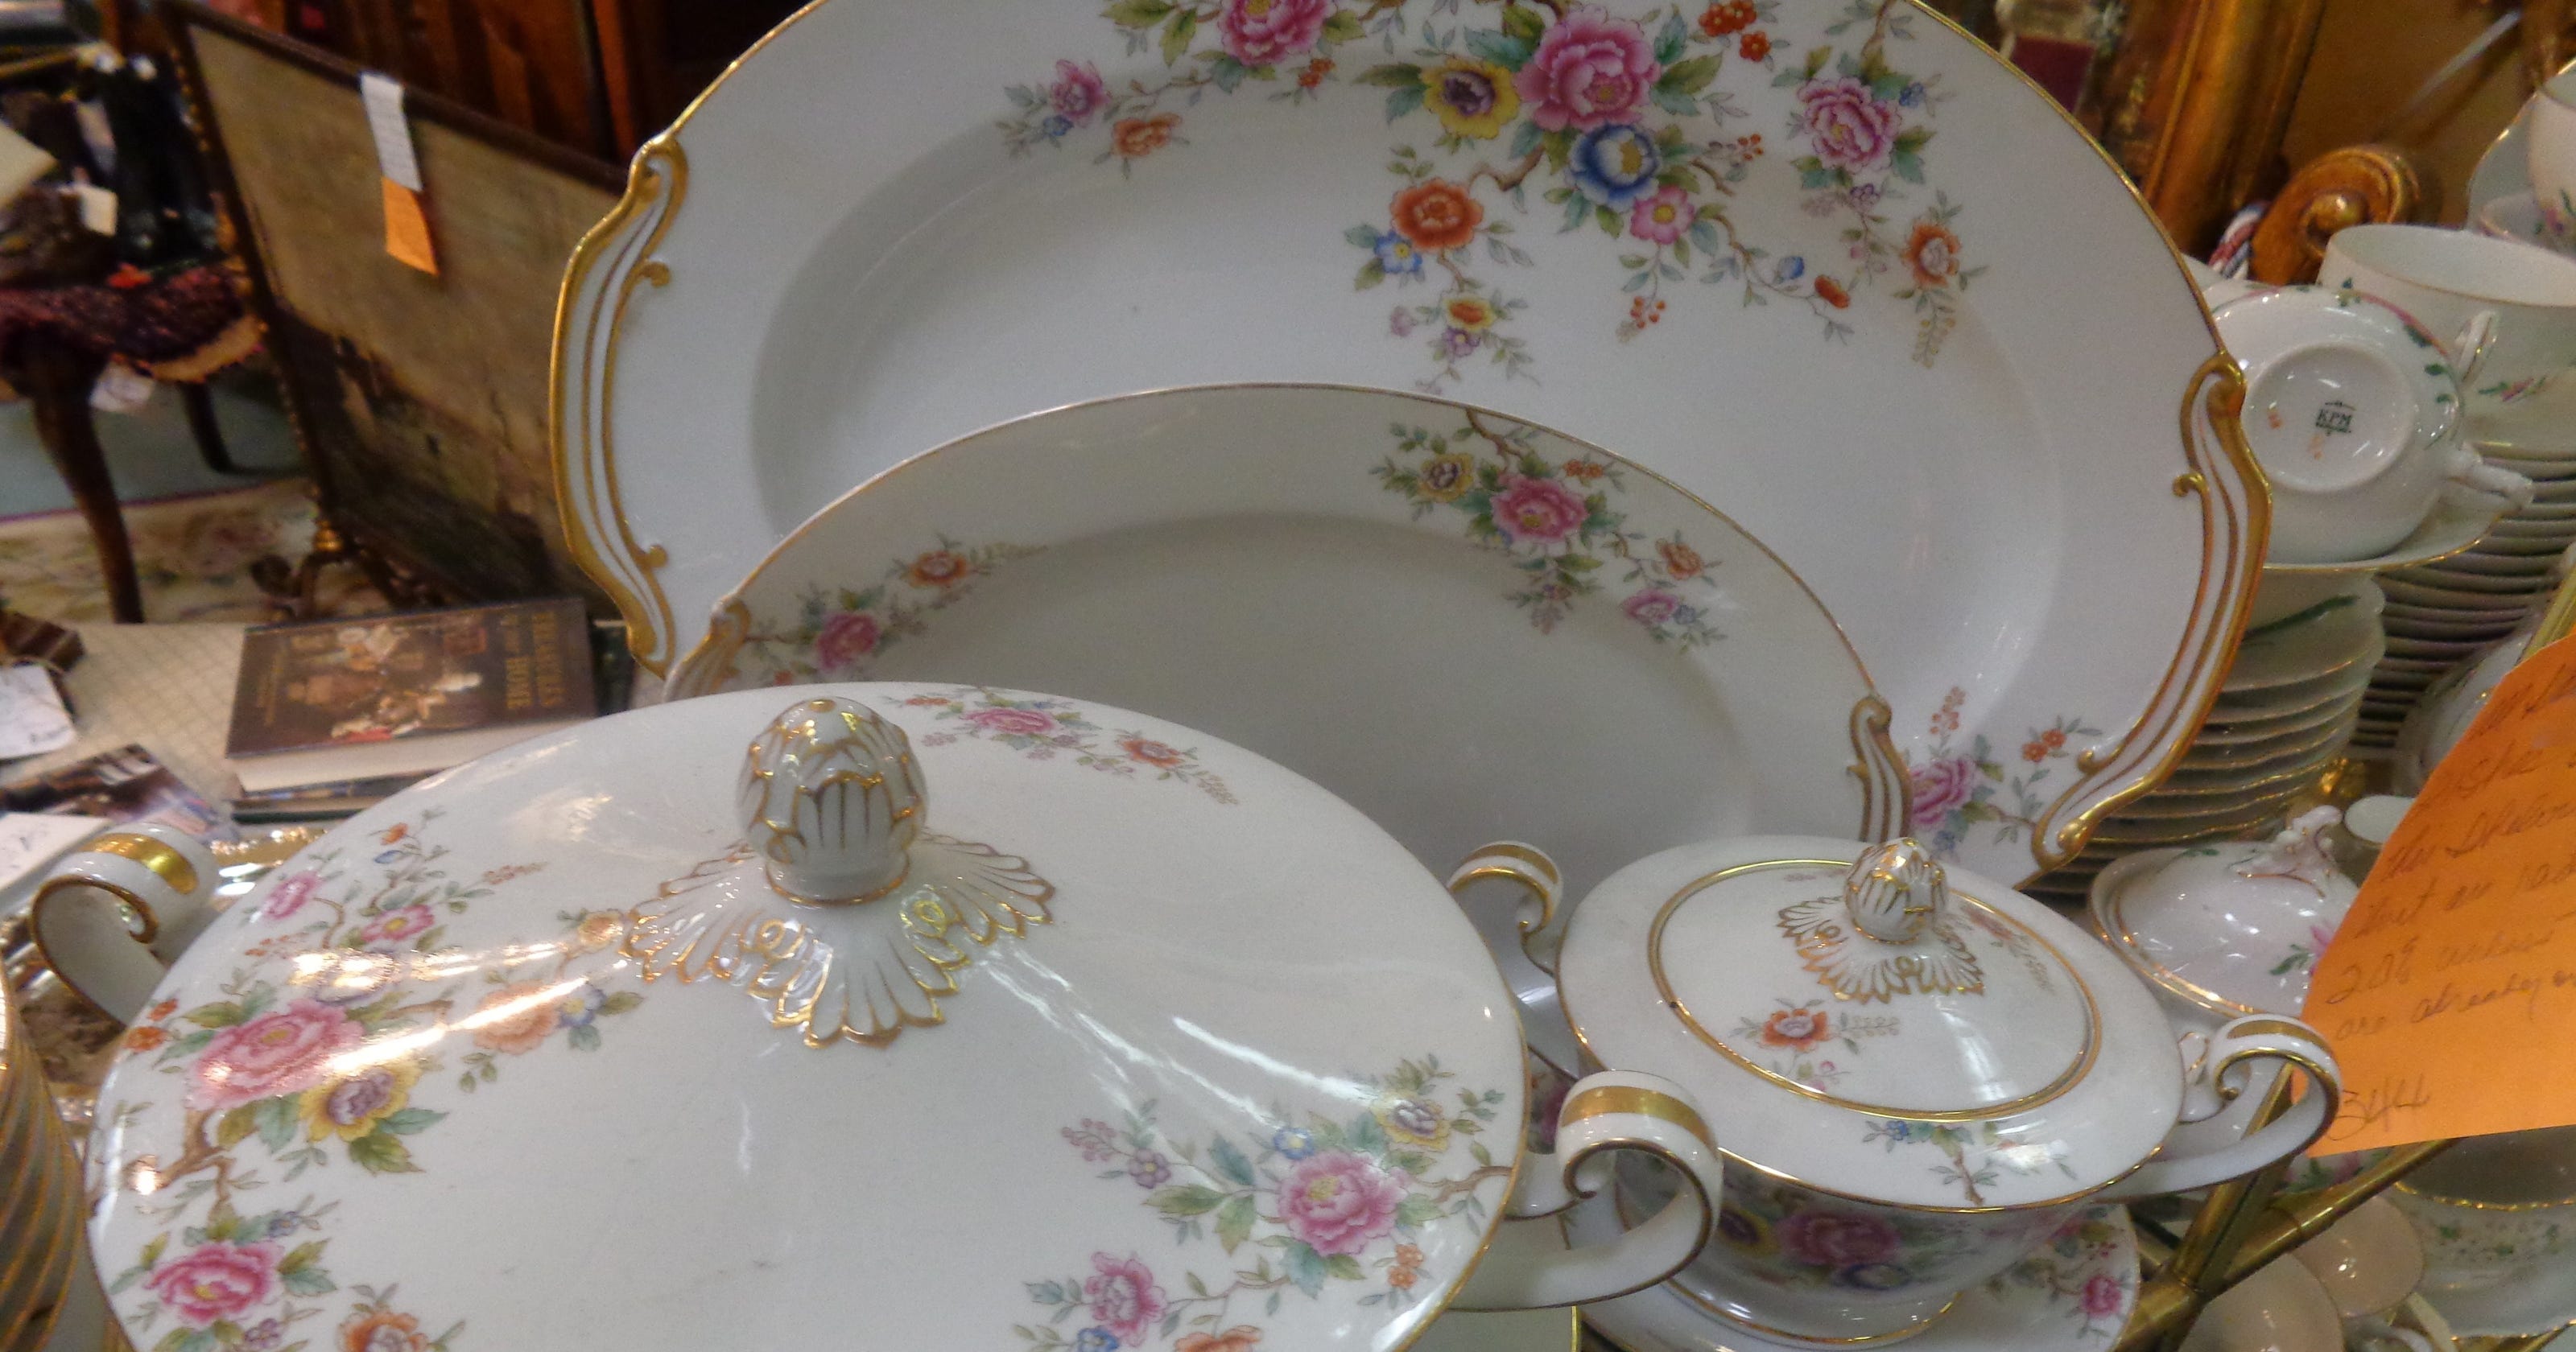  Noritake  china  almost impossible to sell in Arizona